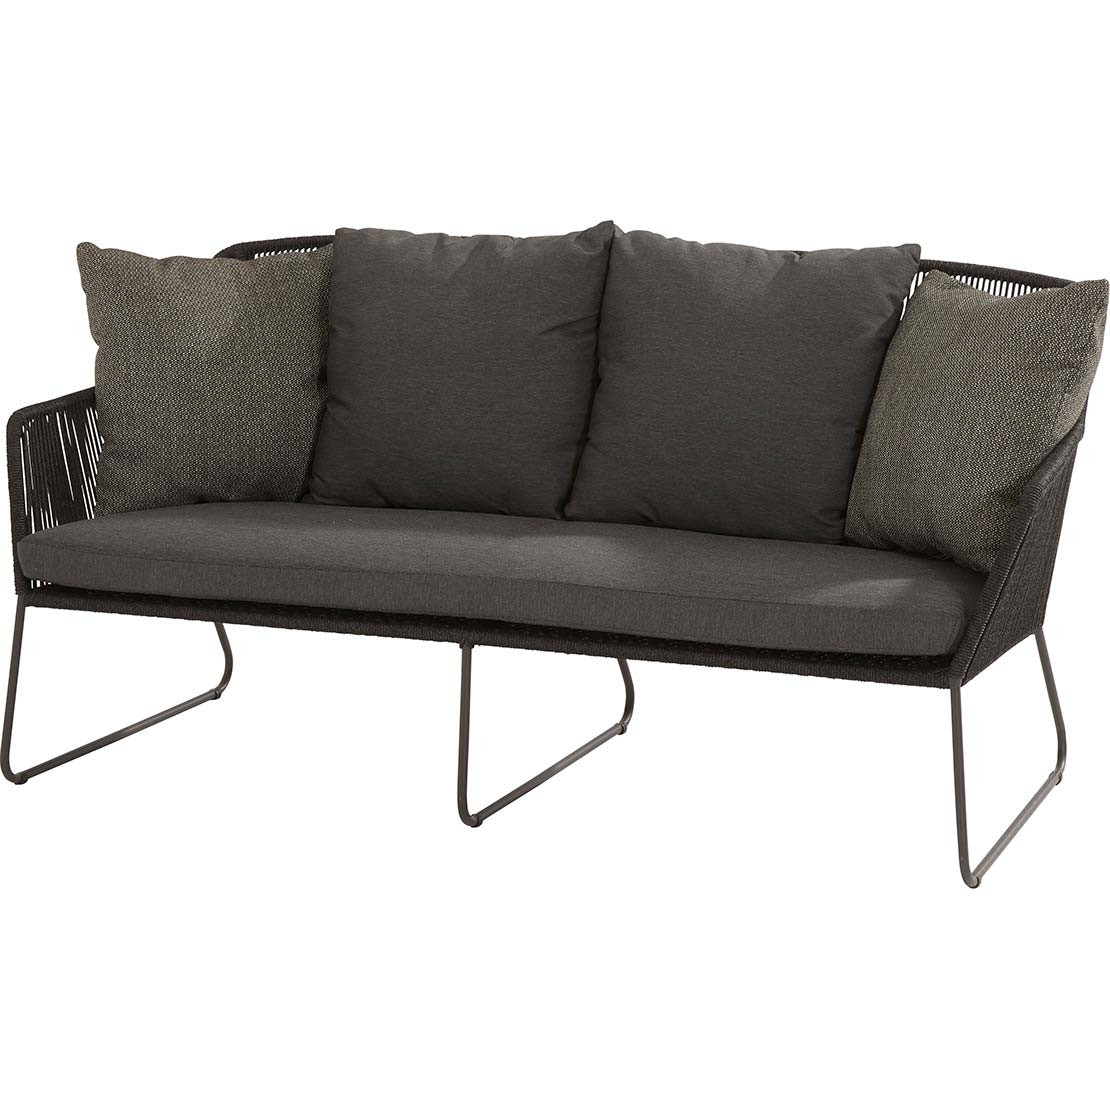 Accor living bench with 5 cushions